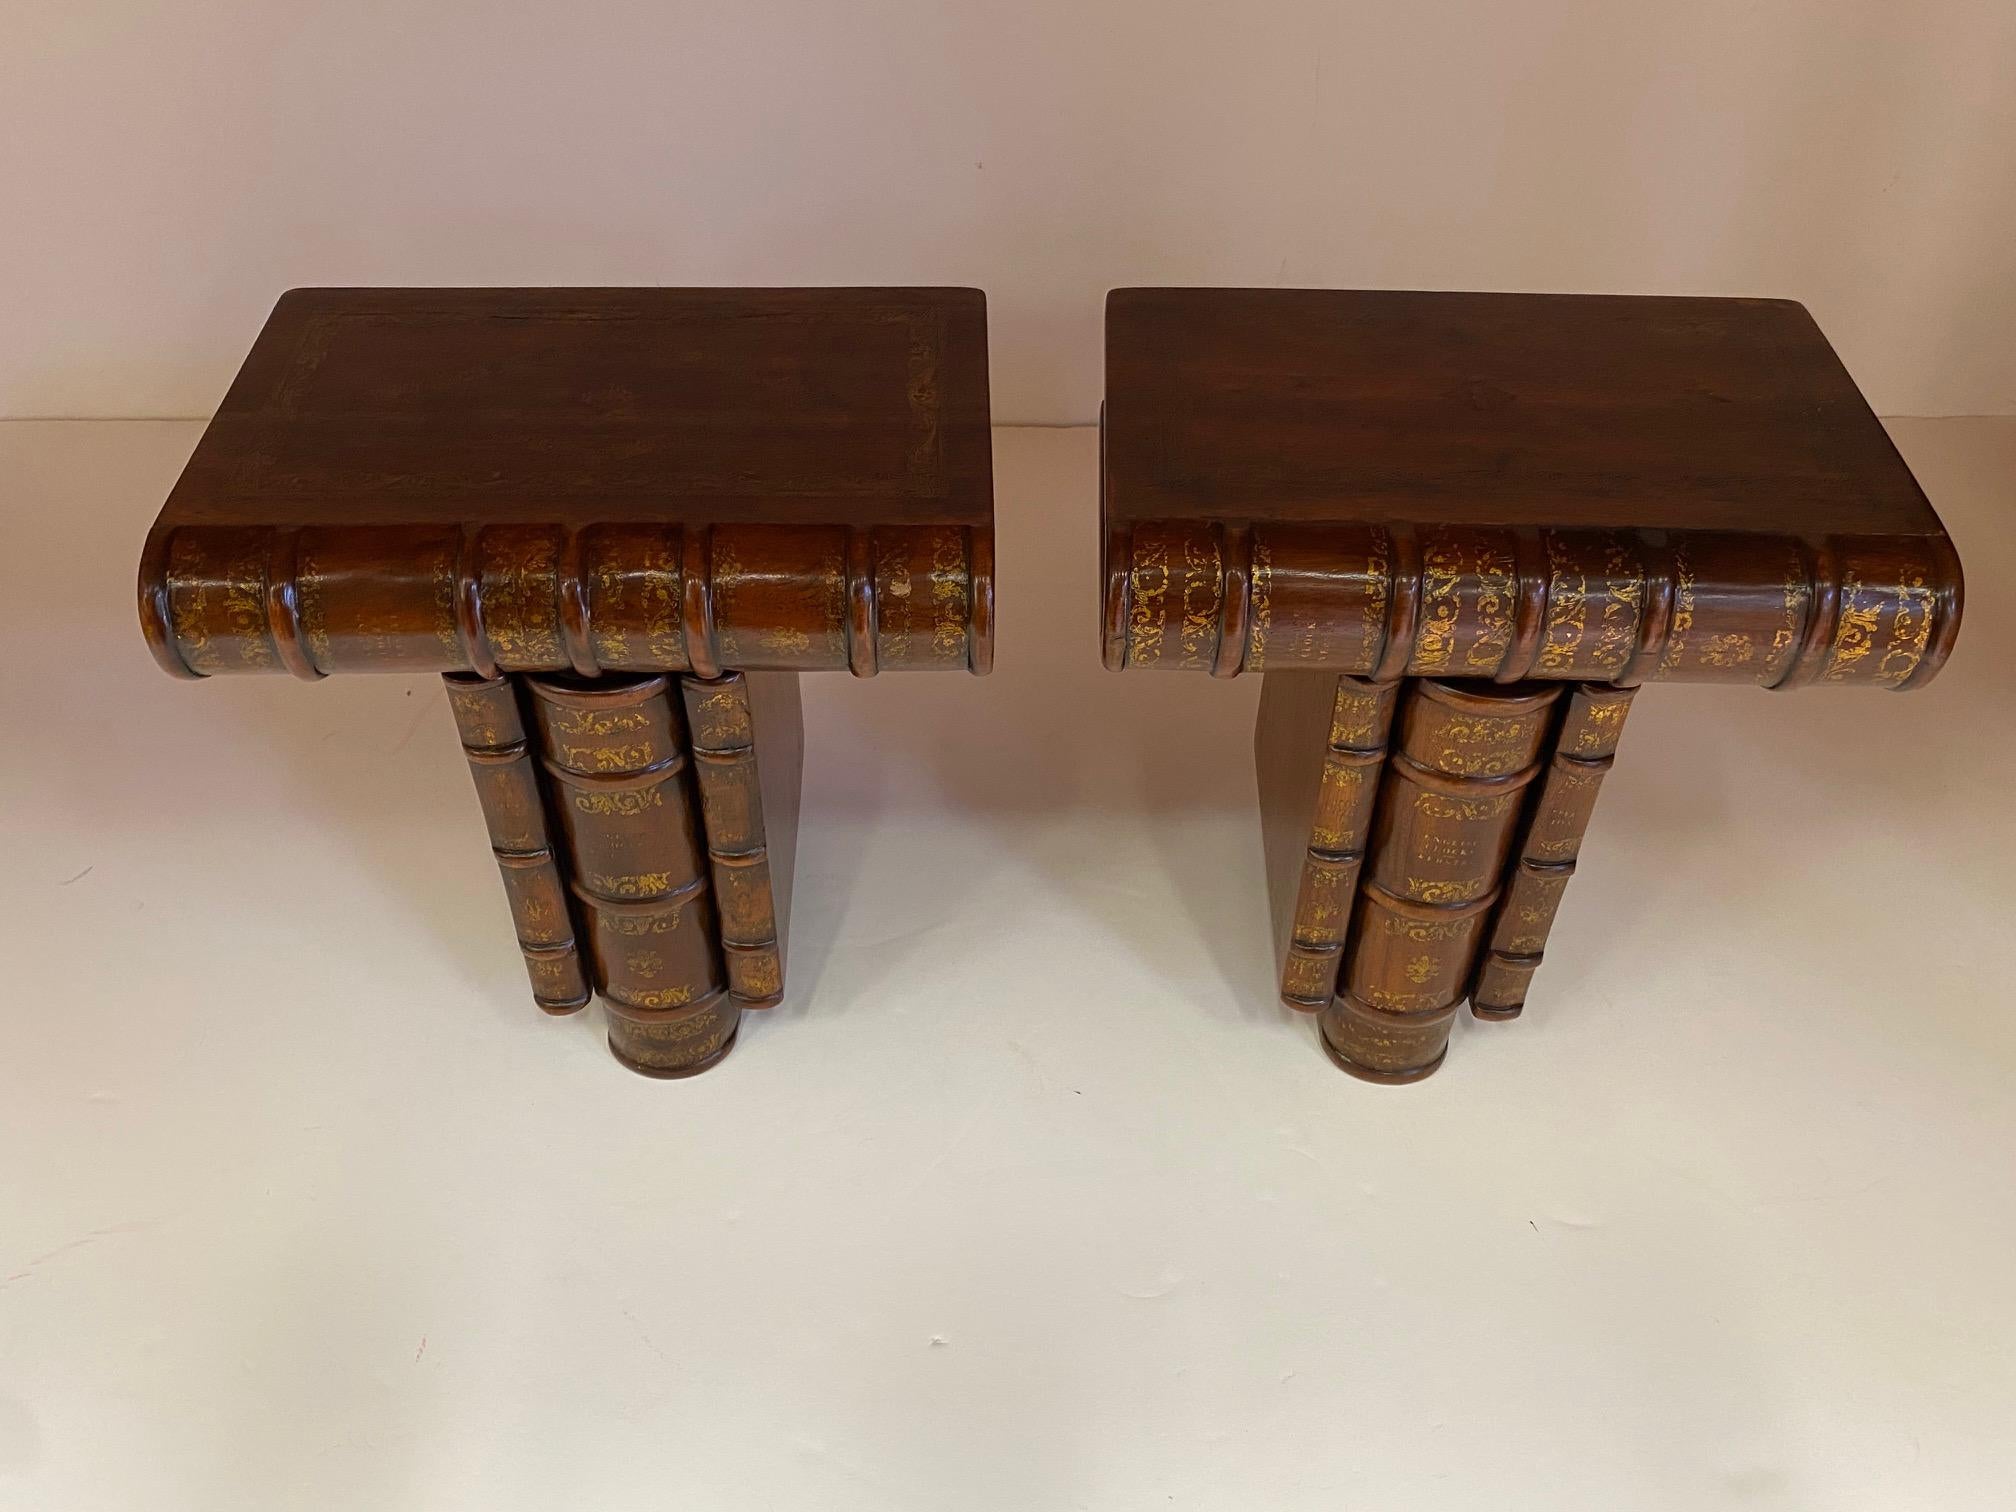 Handsome Pair of Trompe l'oeil Book Brackets For Sale 1